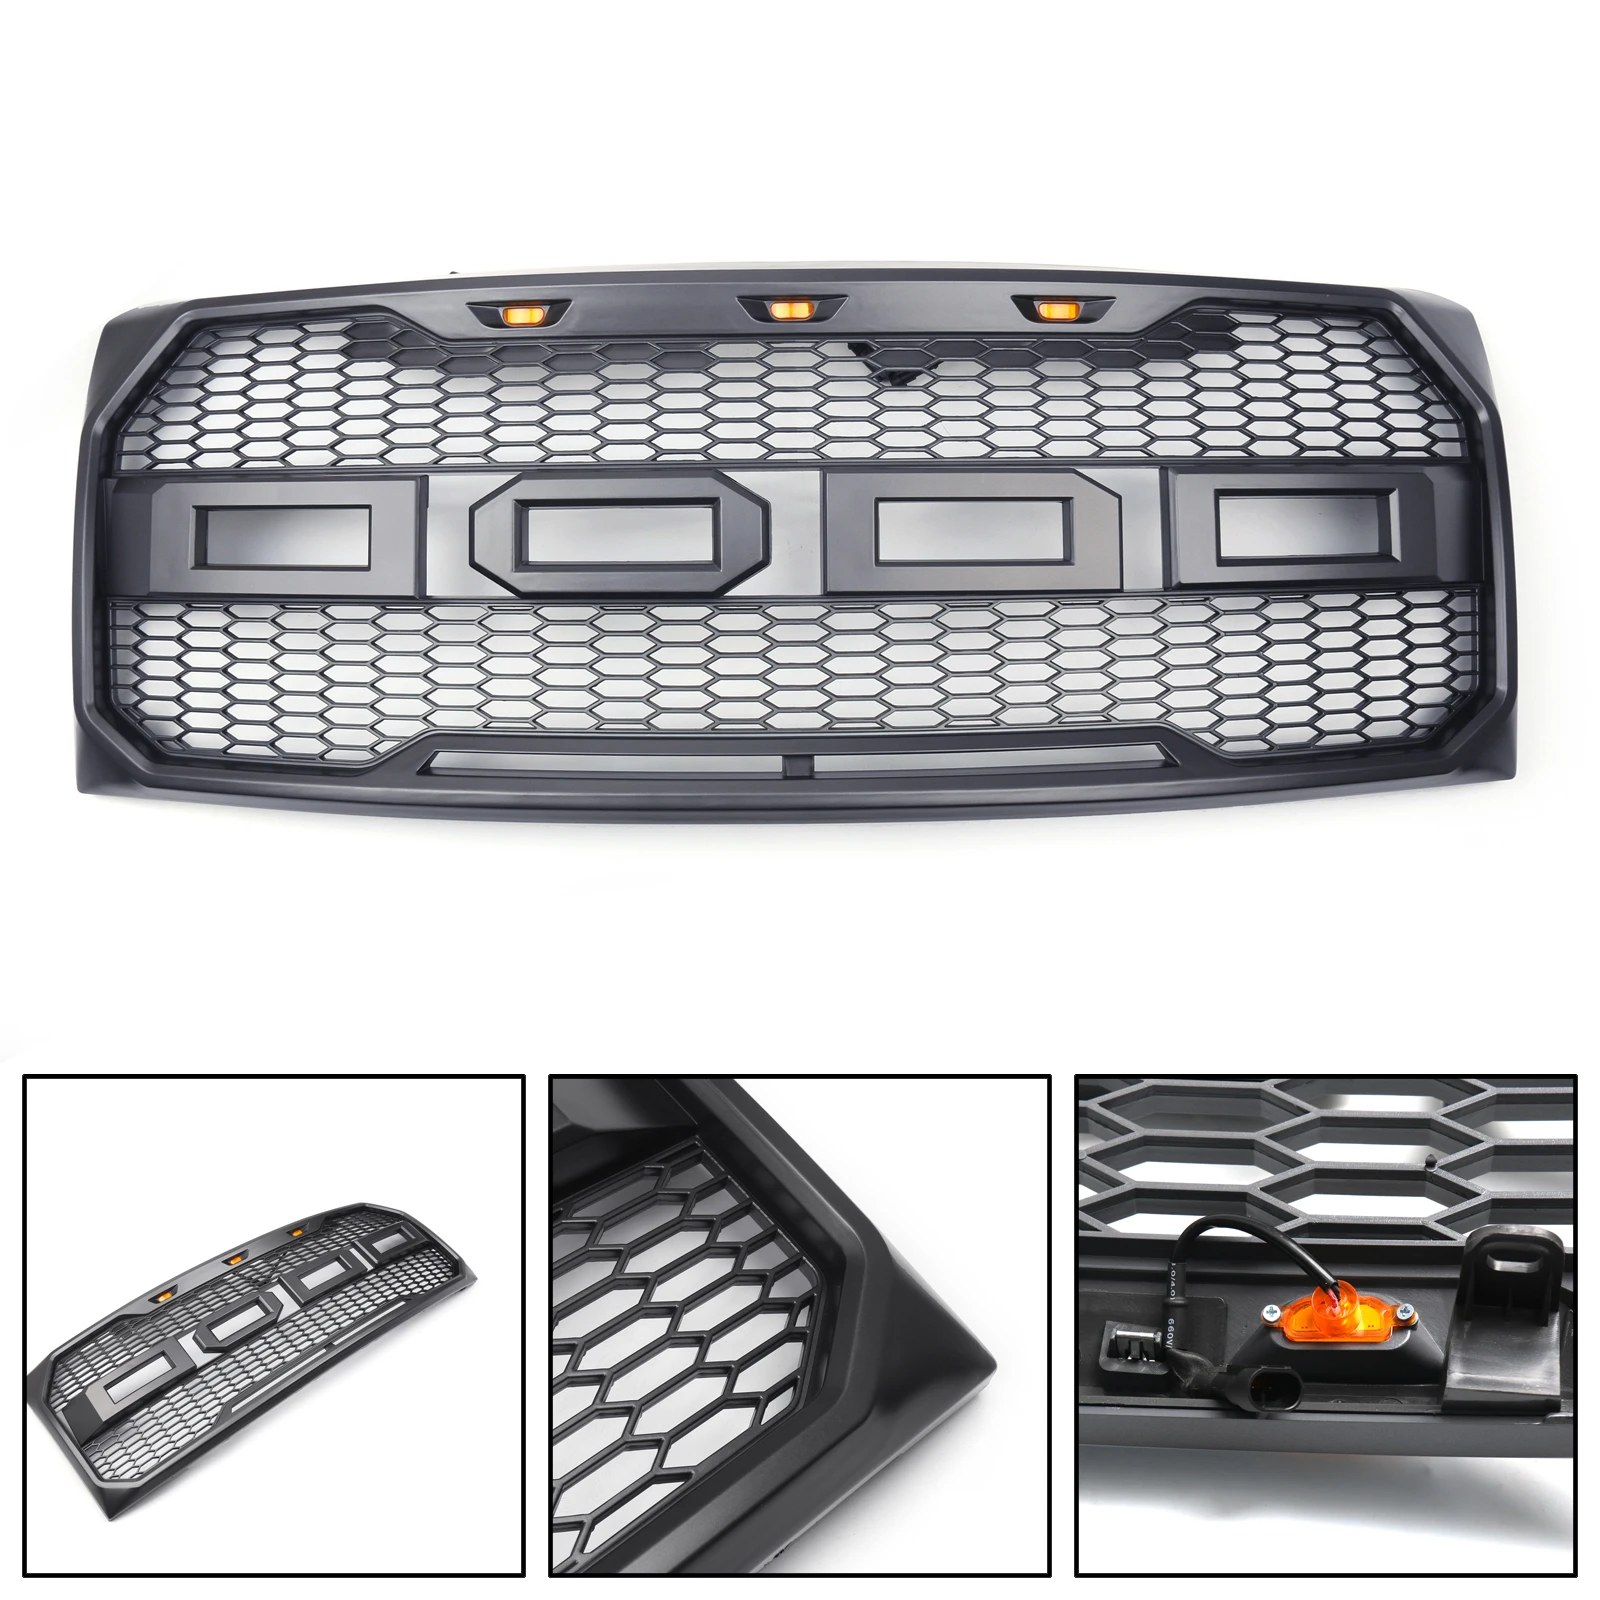 Areyourshop Replacement ABS Front Hood Grille With LED For Ford F150 for Raptor Style 2009 2010 2011 2012 2013 2014